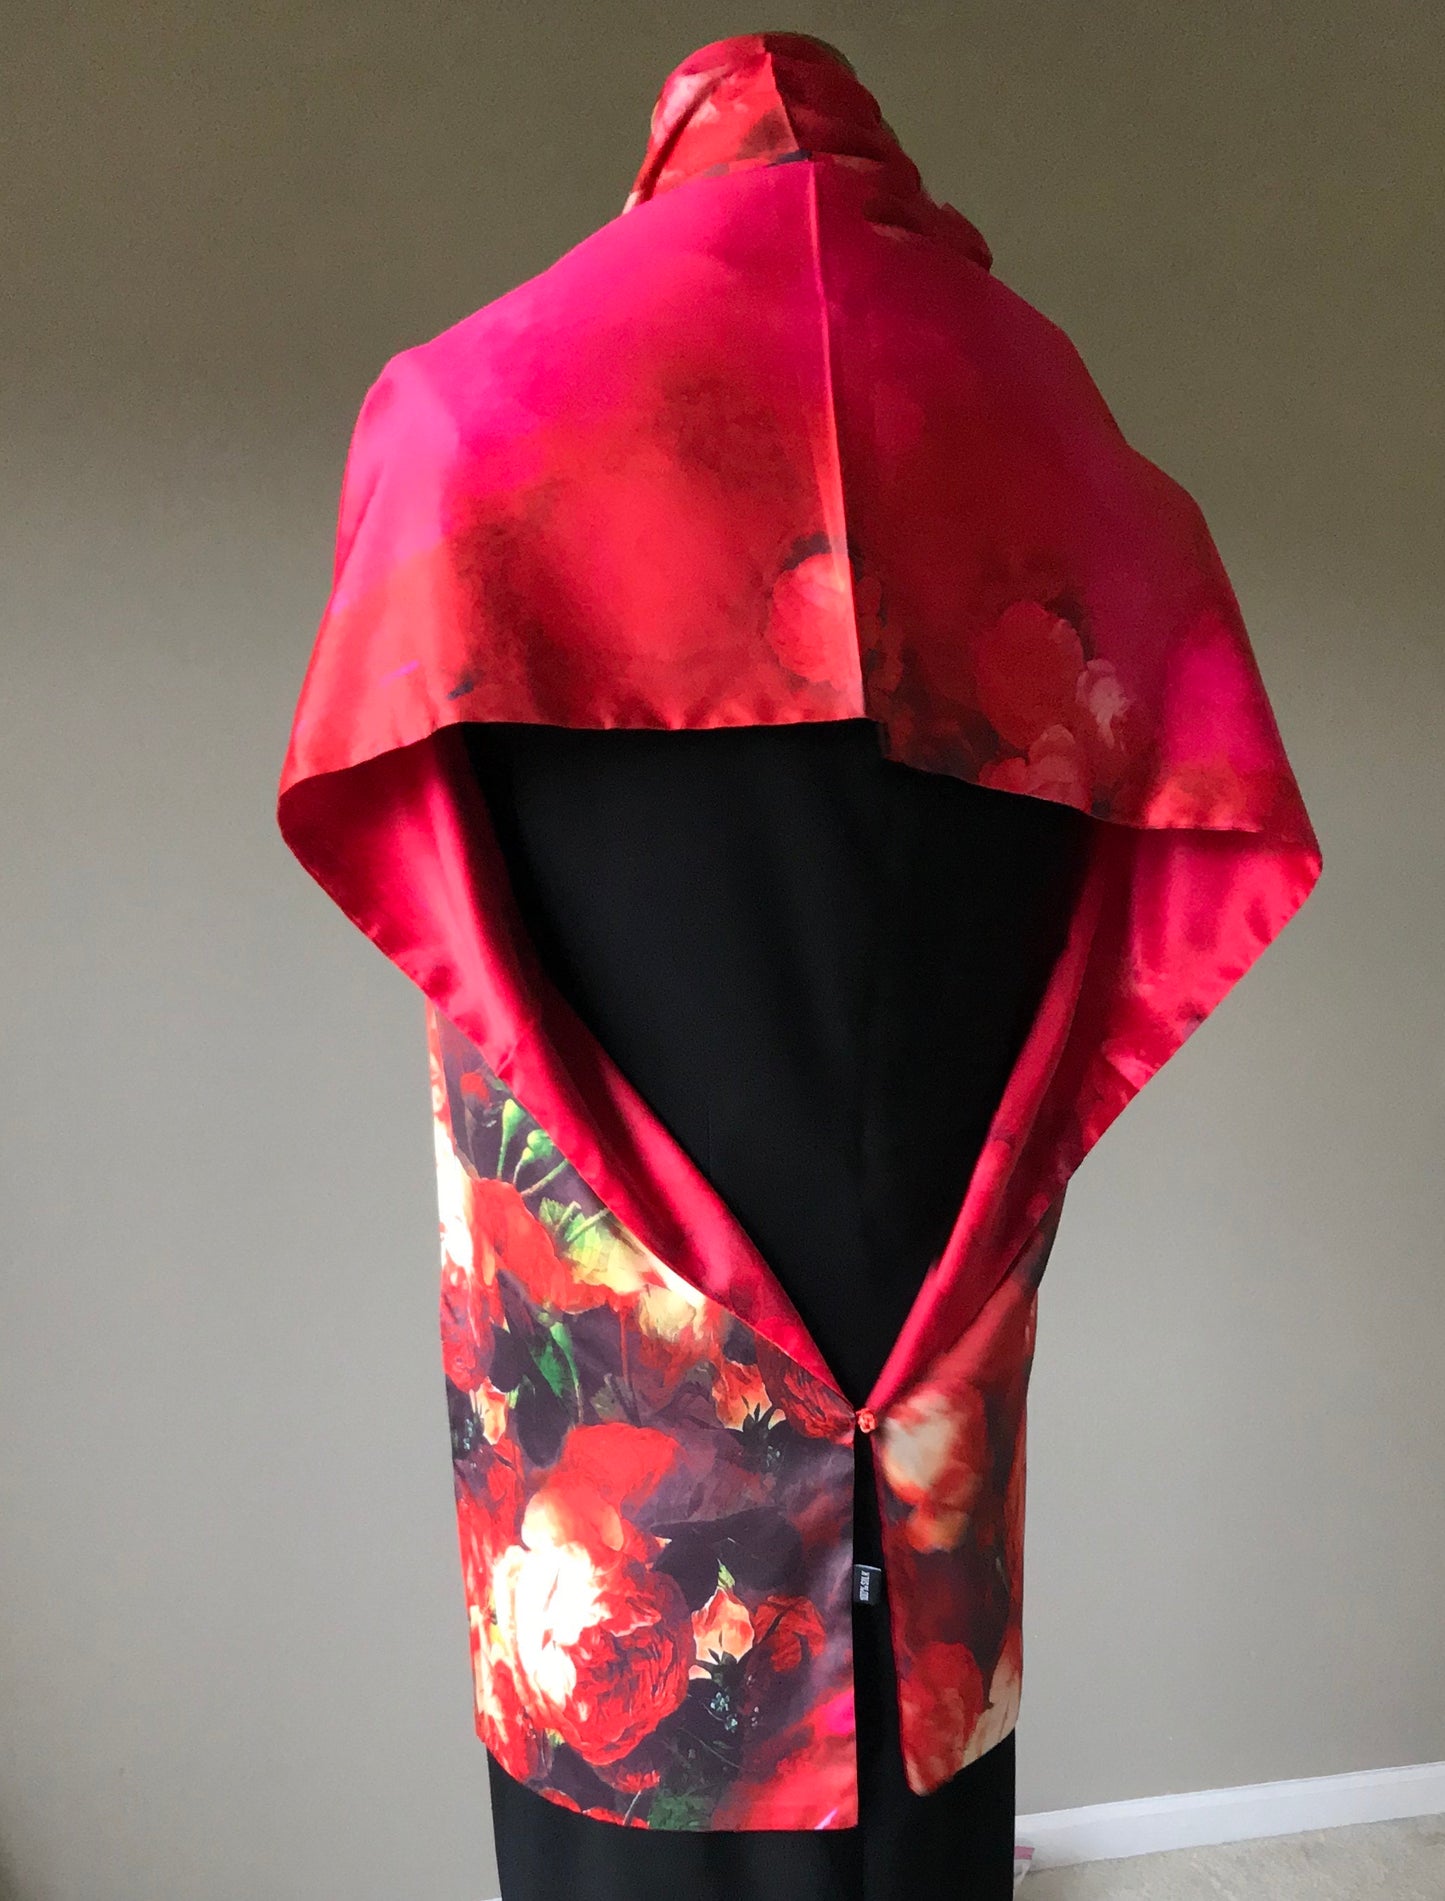 Red floral 100% Silk Satin smooth soft Long double fabric  Scarf with buttons - The Lotus Wave 